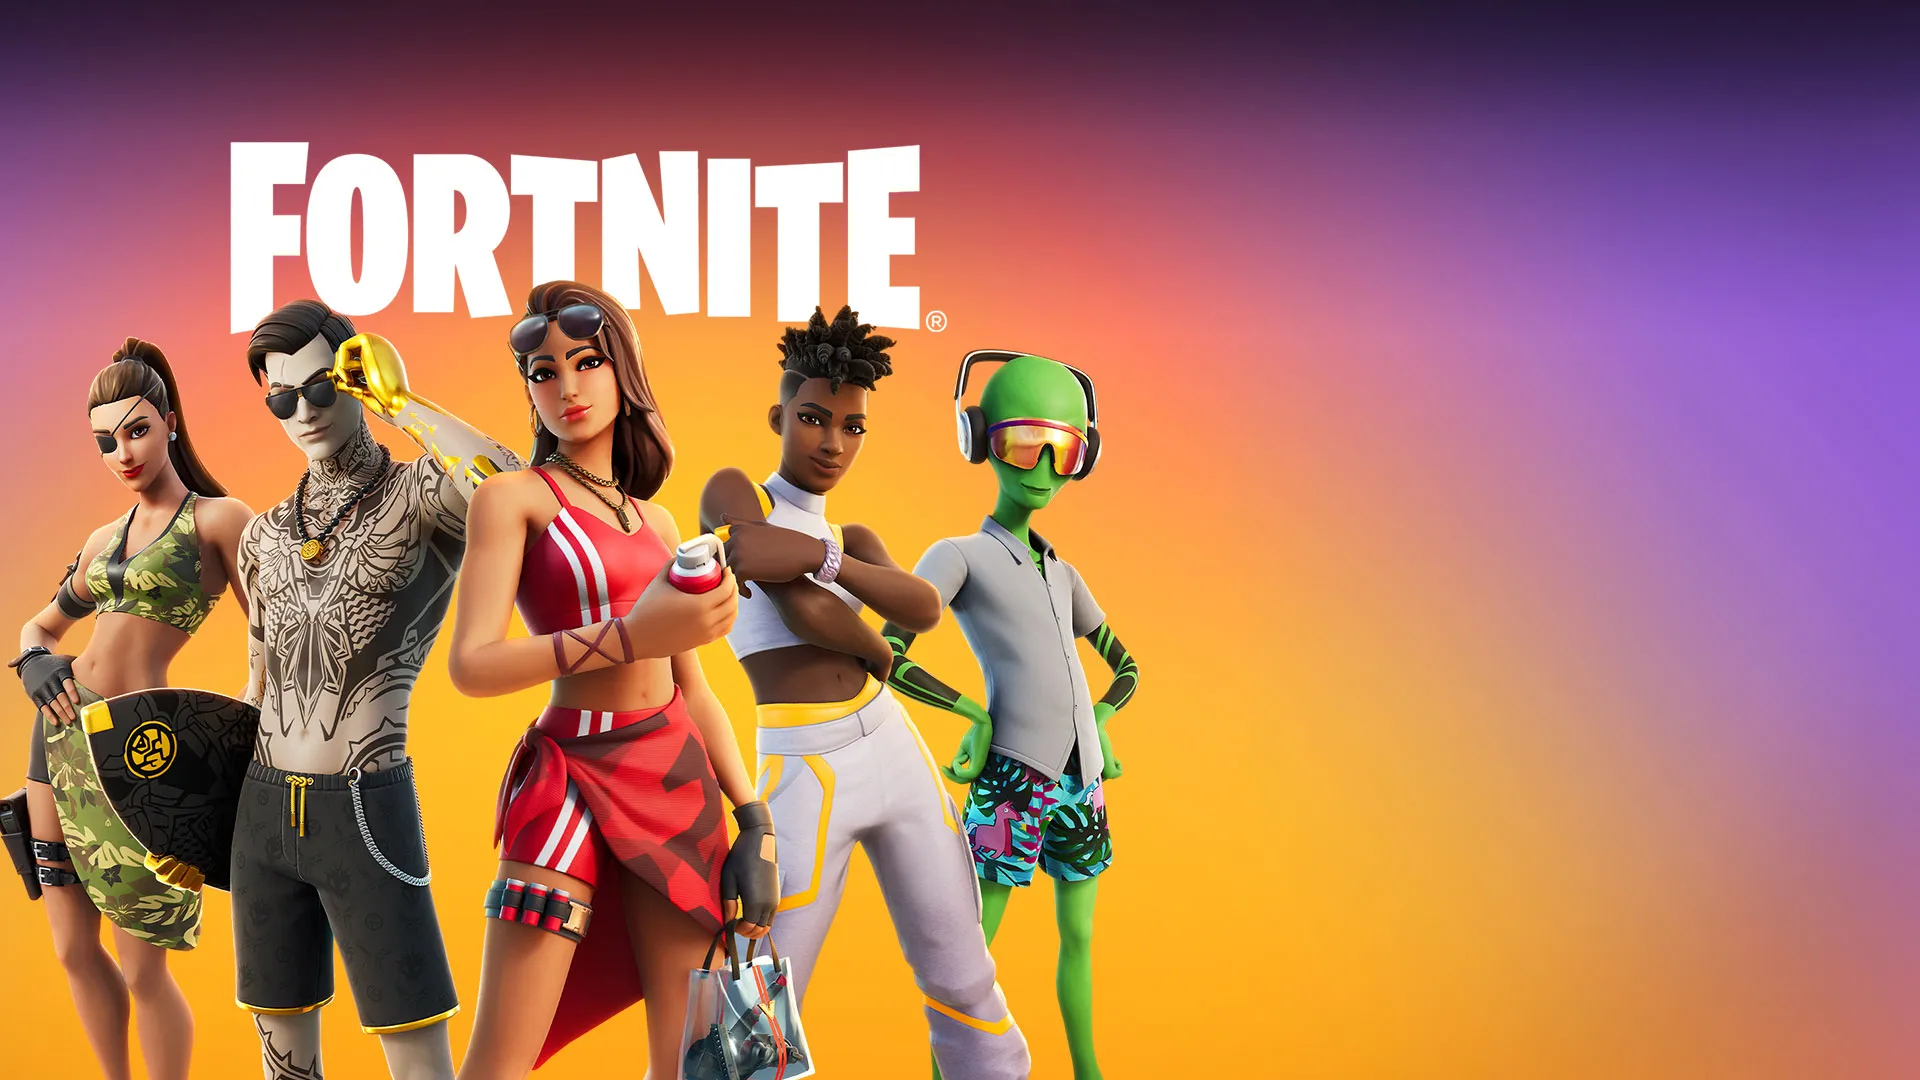 How to Play Fortnite on a Chromebook - Guide to Cloud Gaming, Sideloading,  and Remote Desktop Workarounds